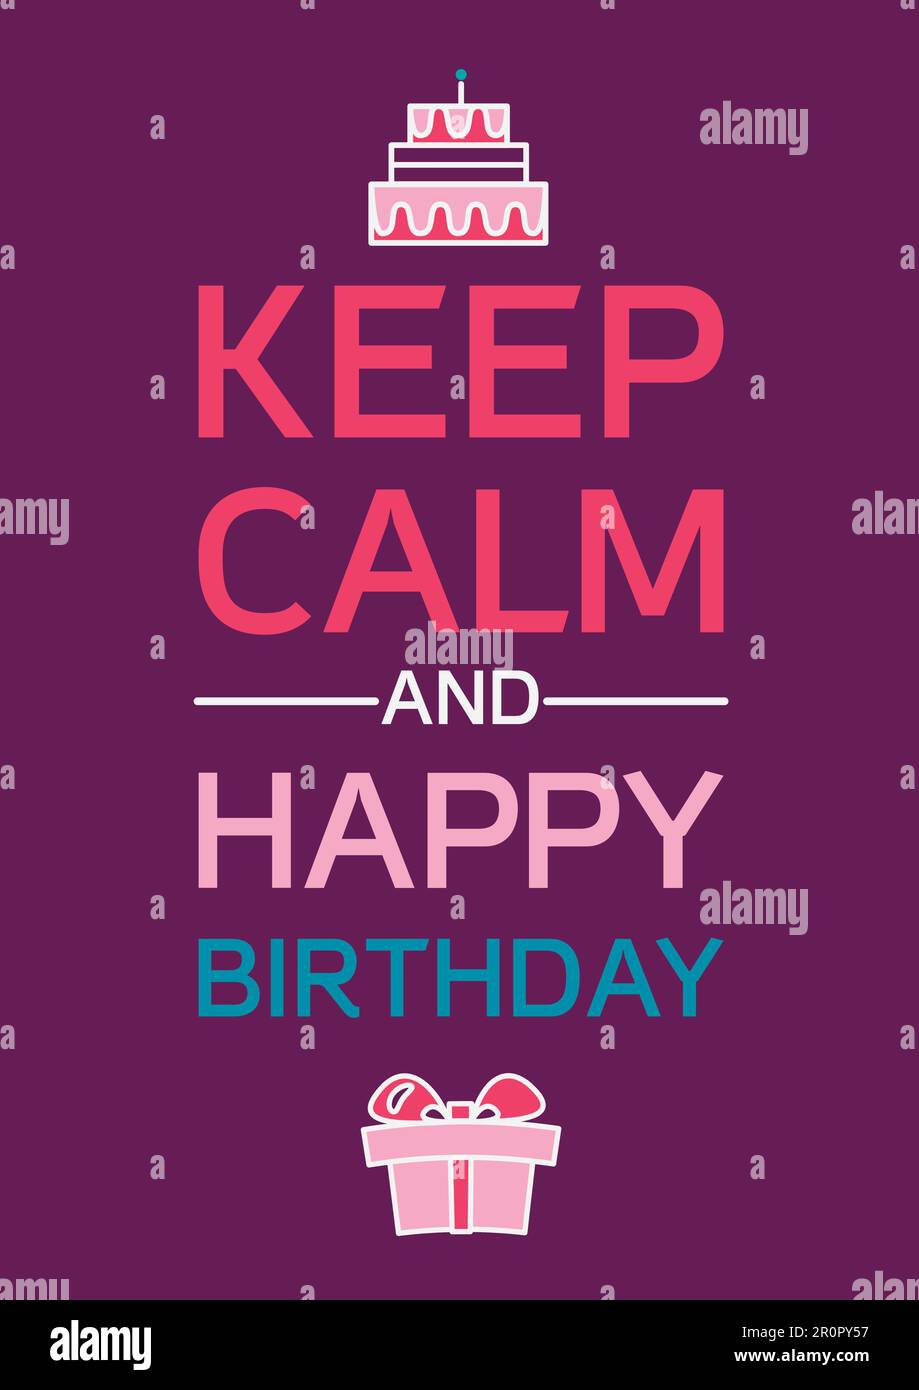 Keep Calm And Happy Birthday Greeting Poster. Vector Stock Vector Image ...